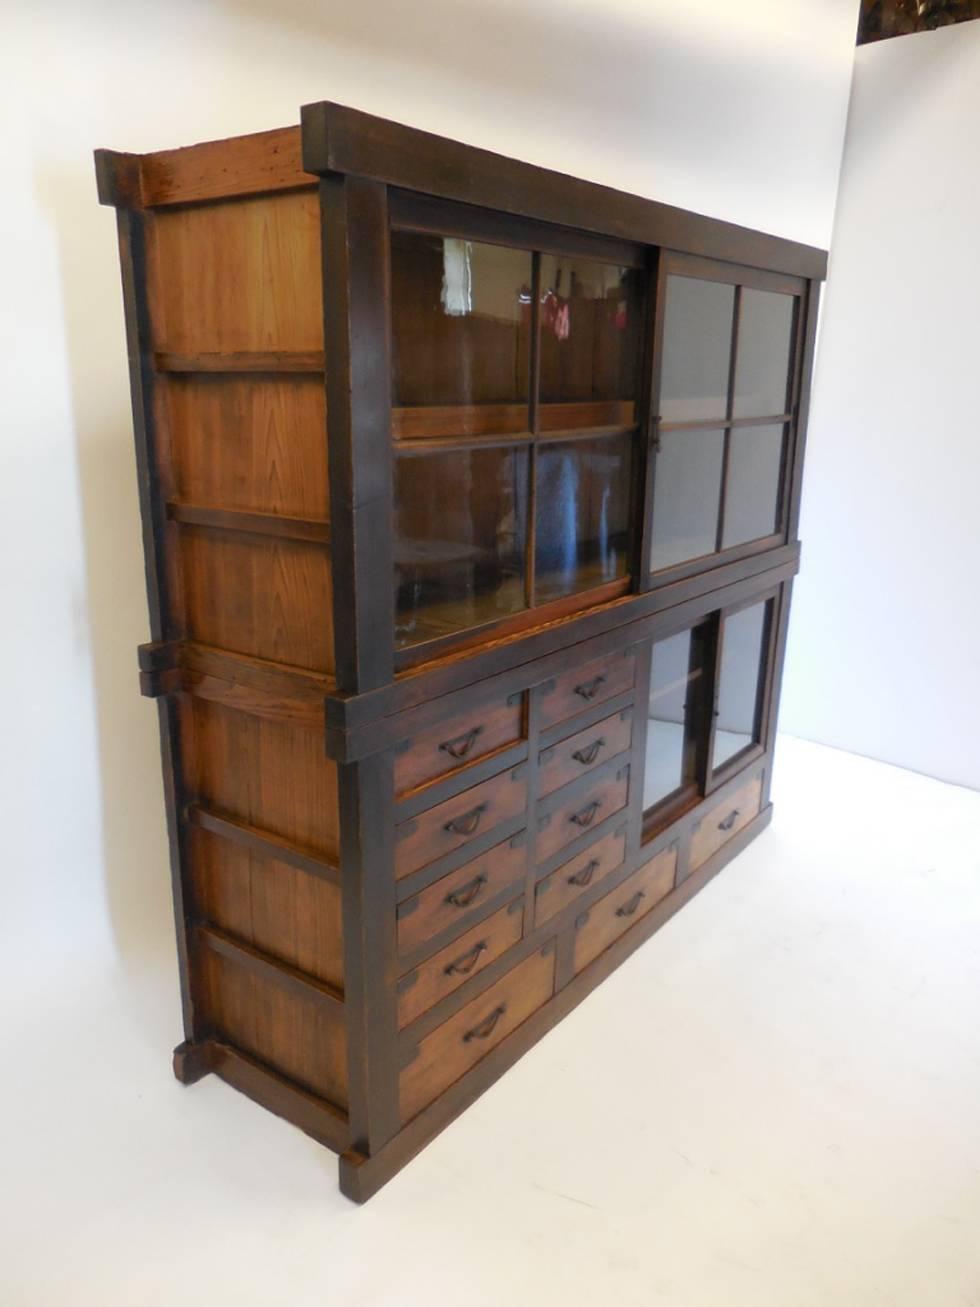 19th century shiop tansu cabinet with two sliding glass doors on top piece with one interior shelf. Original glass.
Bottom piece consists of eleven drawers and a smaller pair of sliding doors with an interior shelf.
Original hardware, bamboo nails.